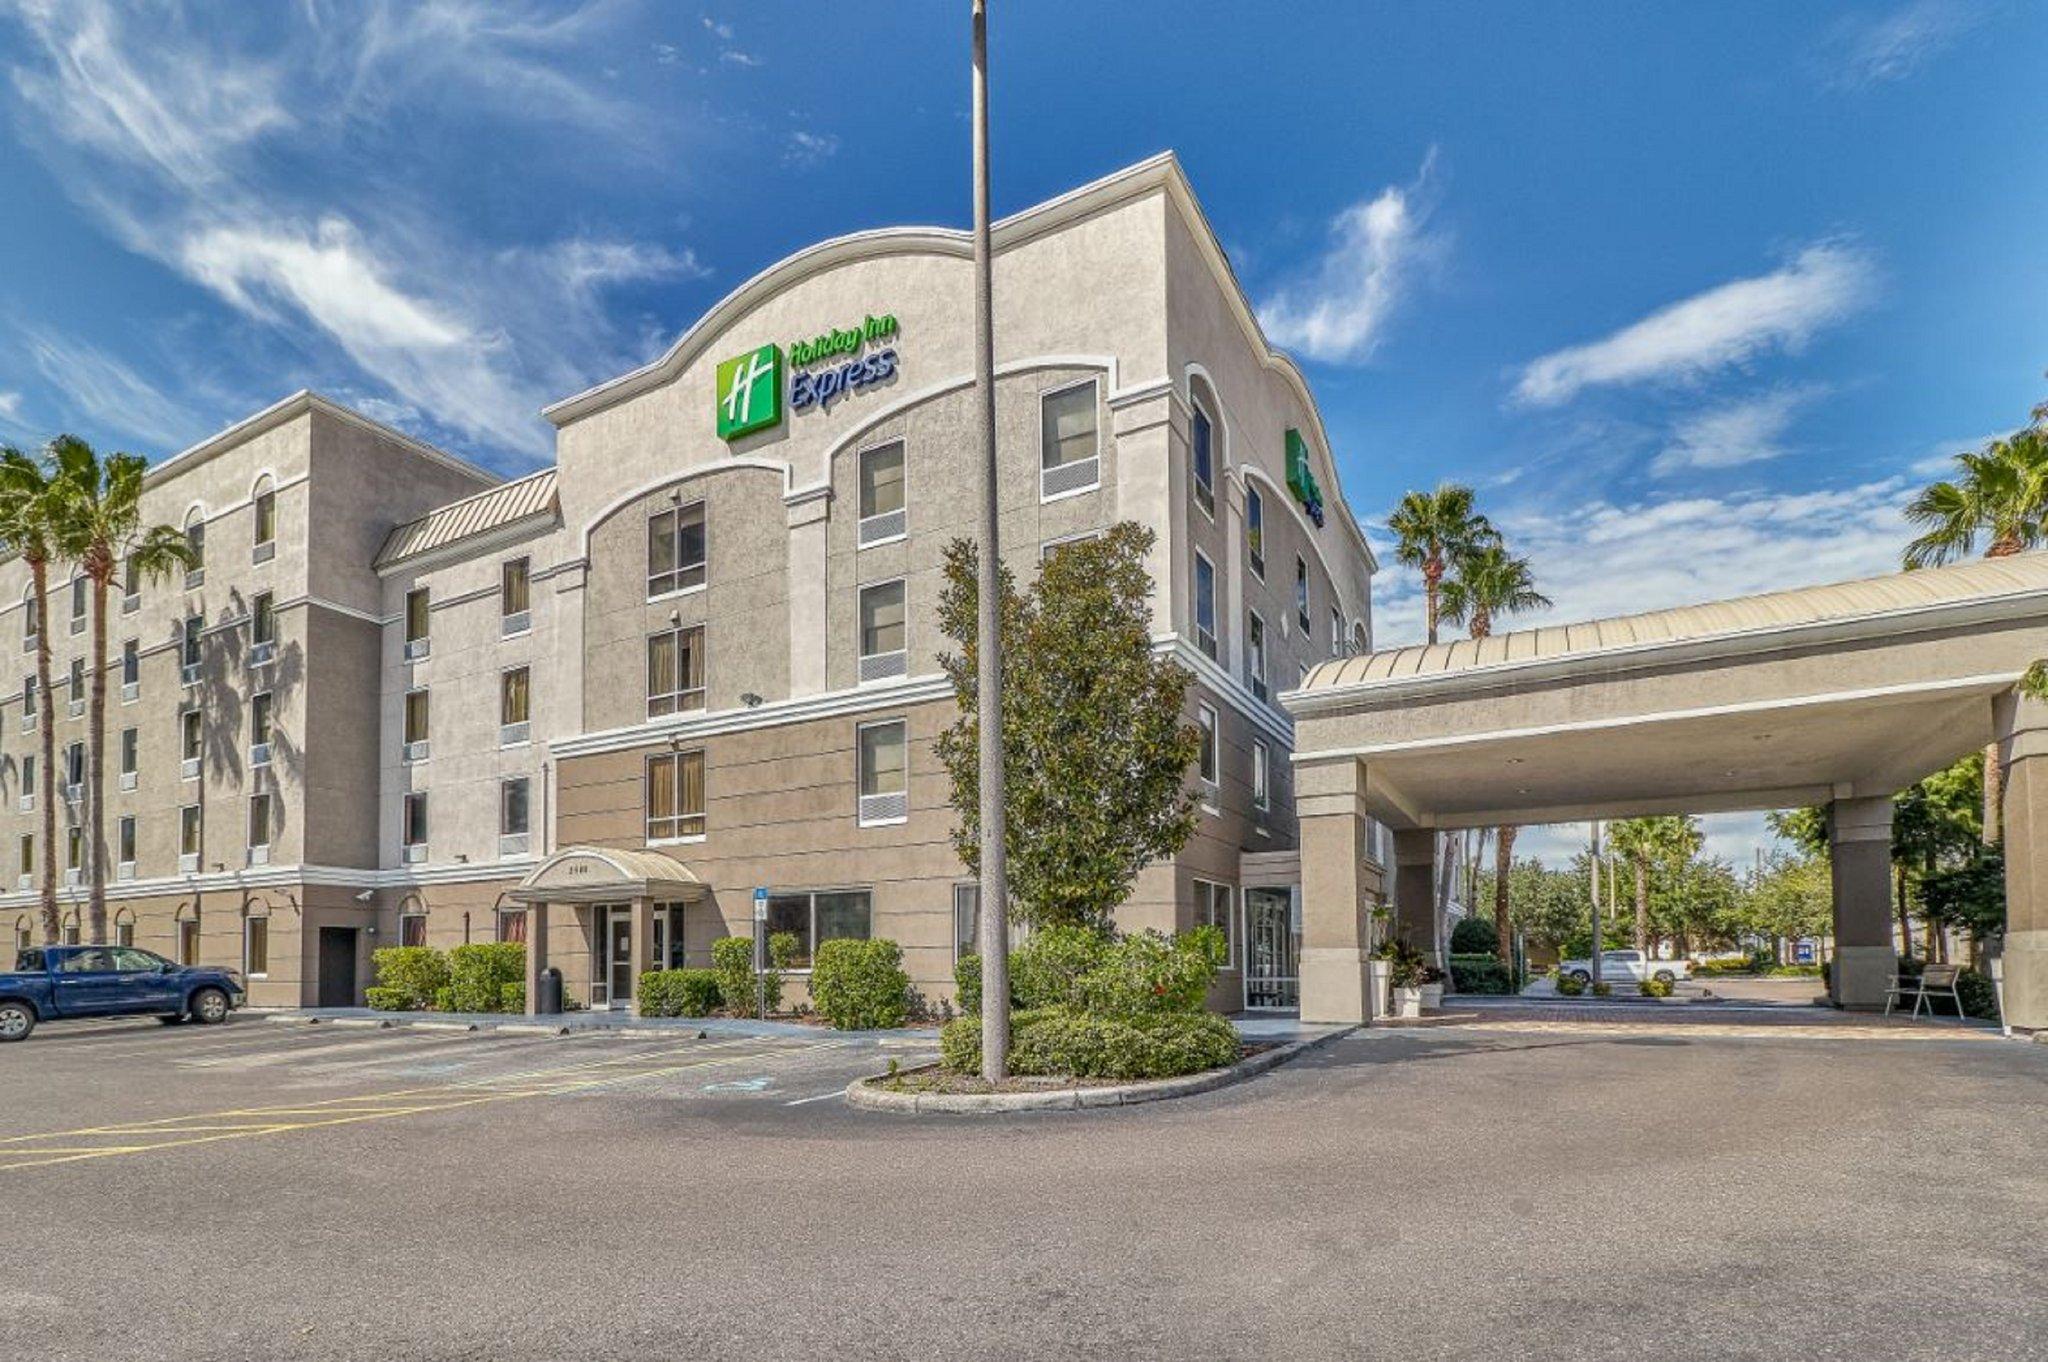 Holiday Inn Express & Suites Clearwater/Us 19 N in Clearwater, FL